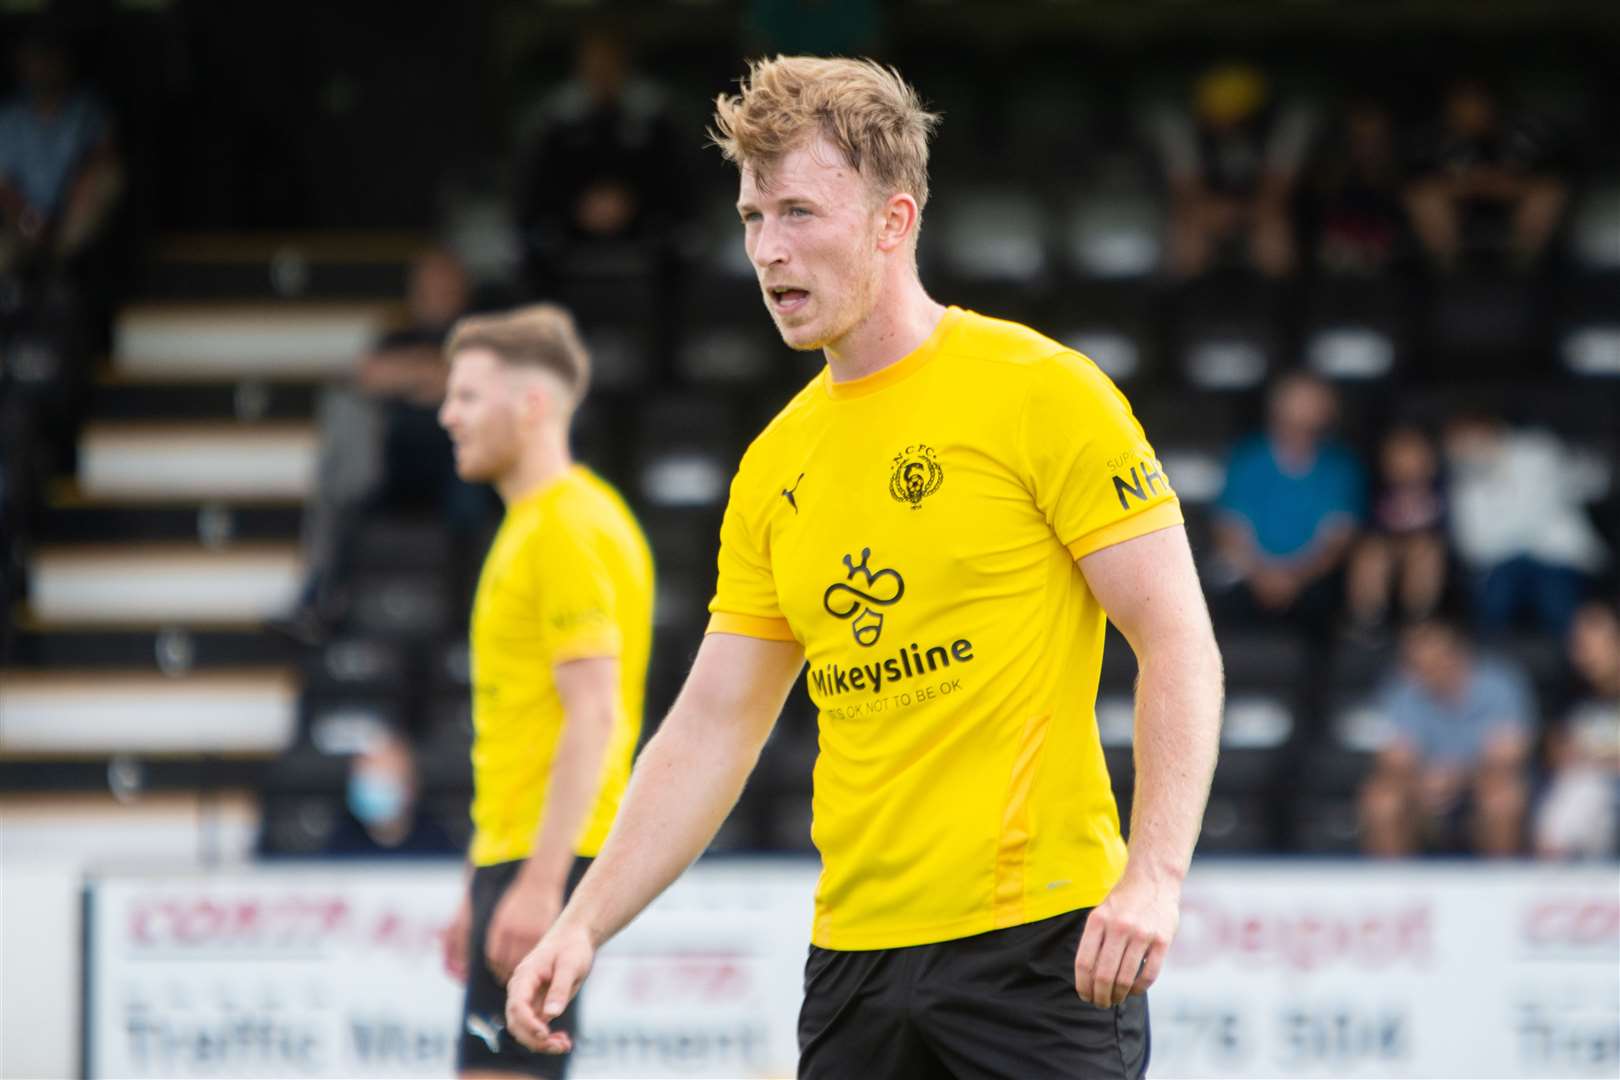 Summer signing from Fort William, John Treasurer, returned on Saturday after injury and Covid absences. Picture: Daniel Forsyth